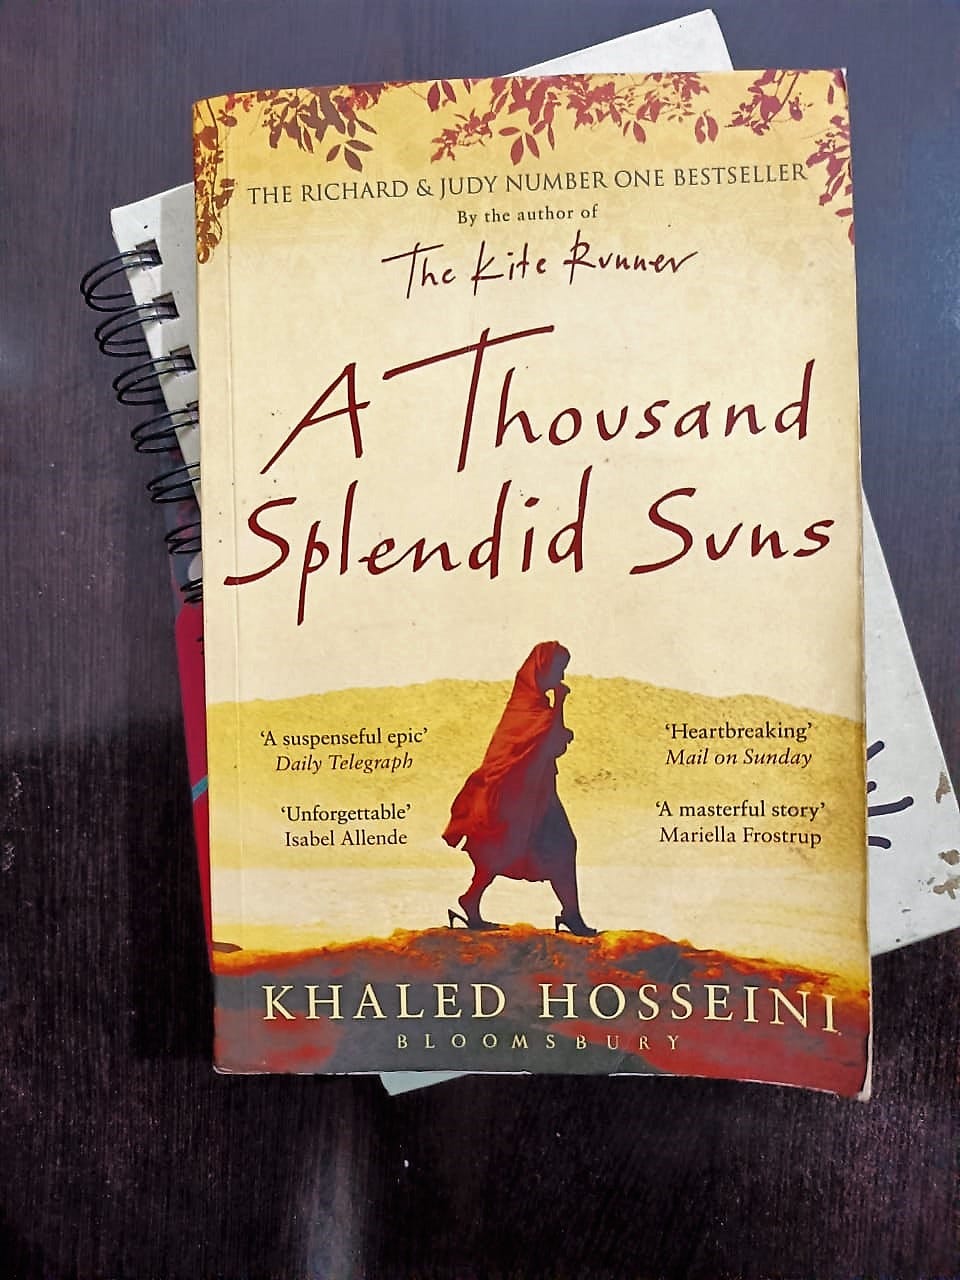 book review for a thousand splendid suns